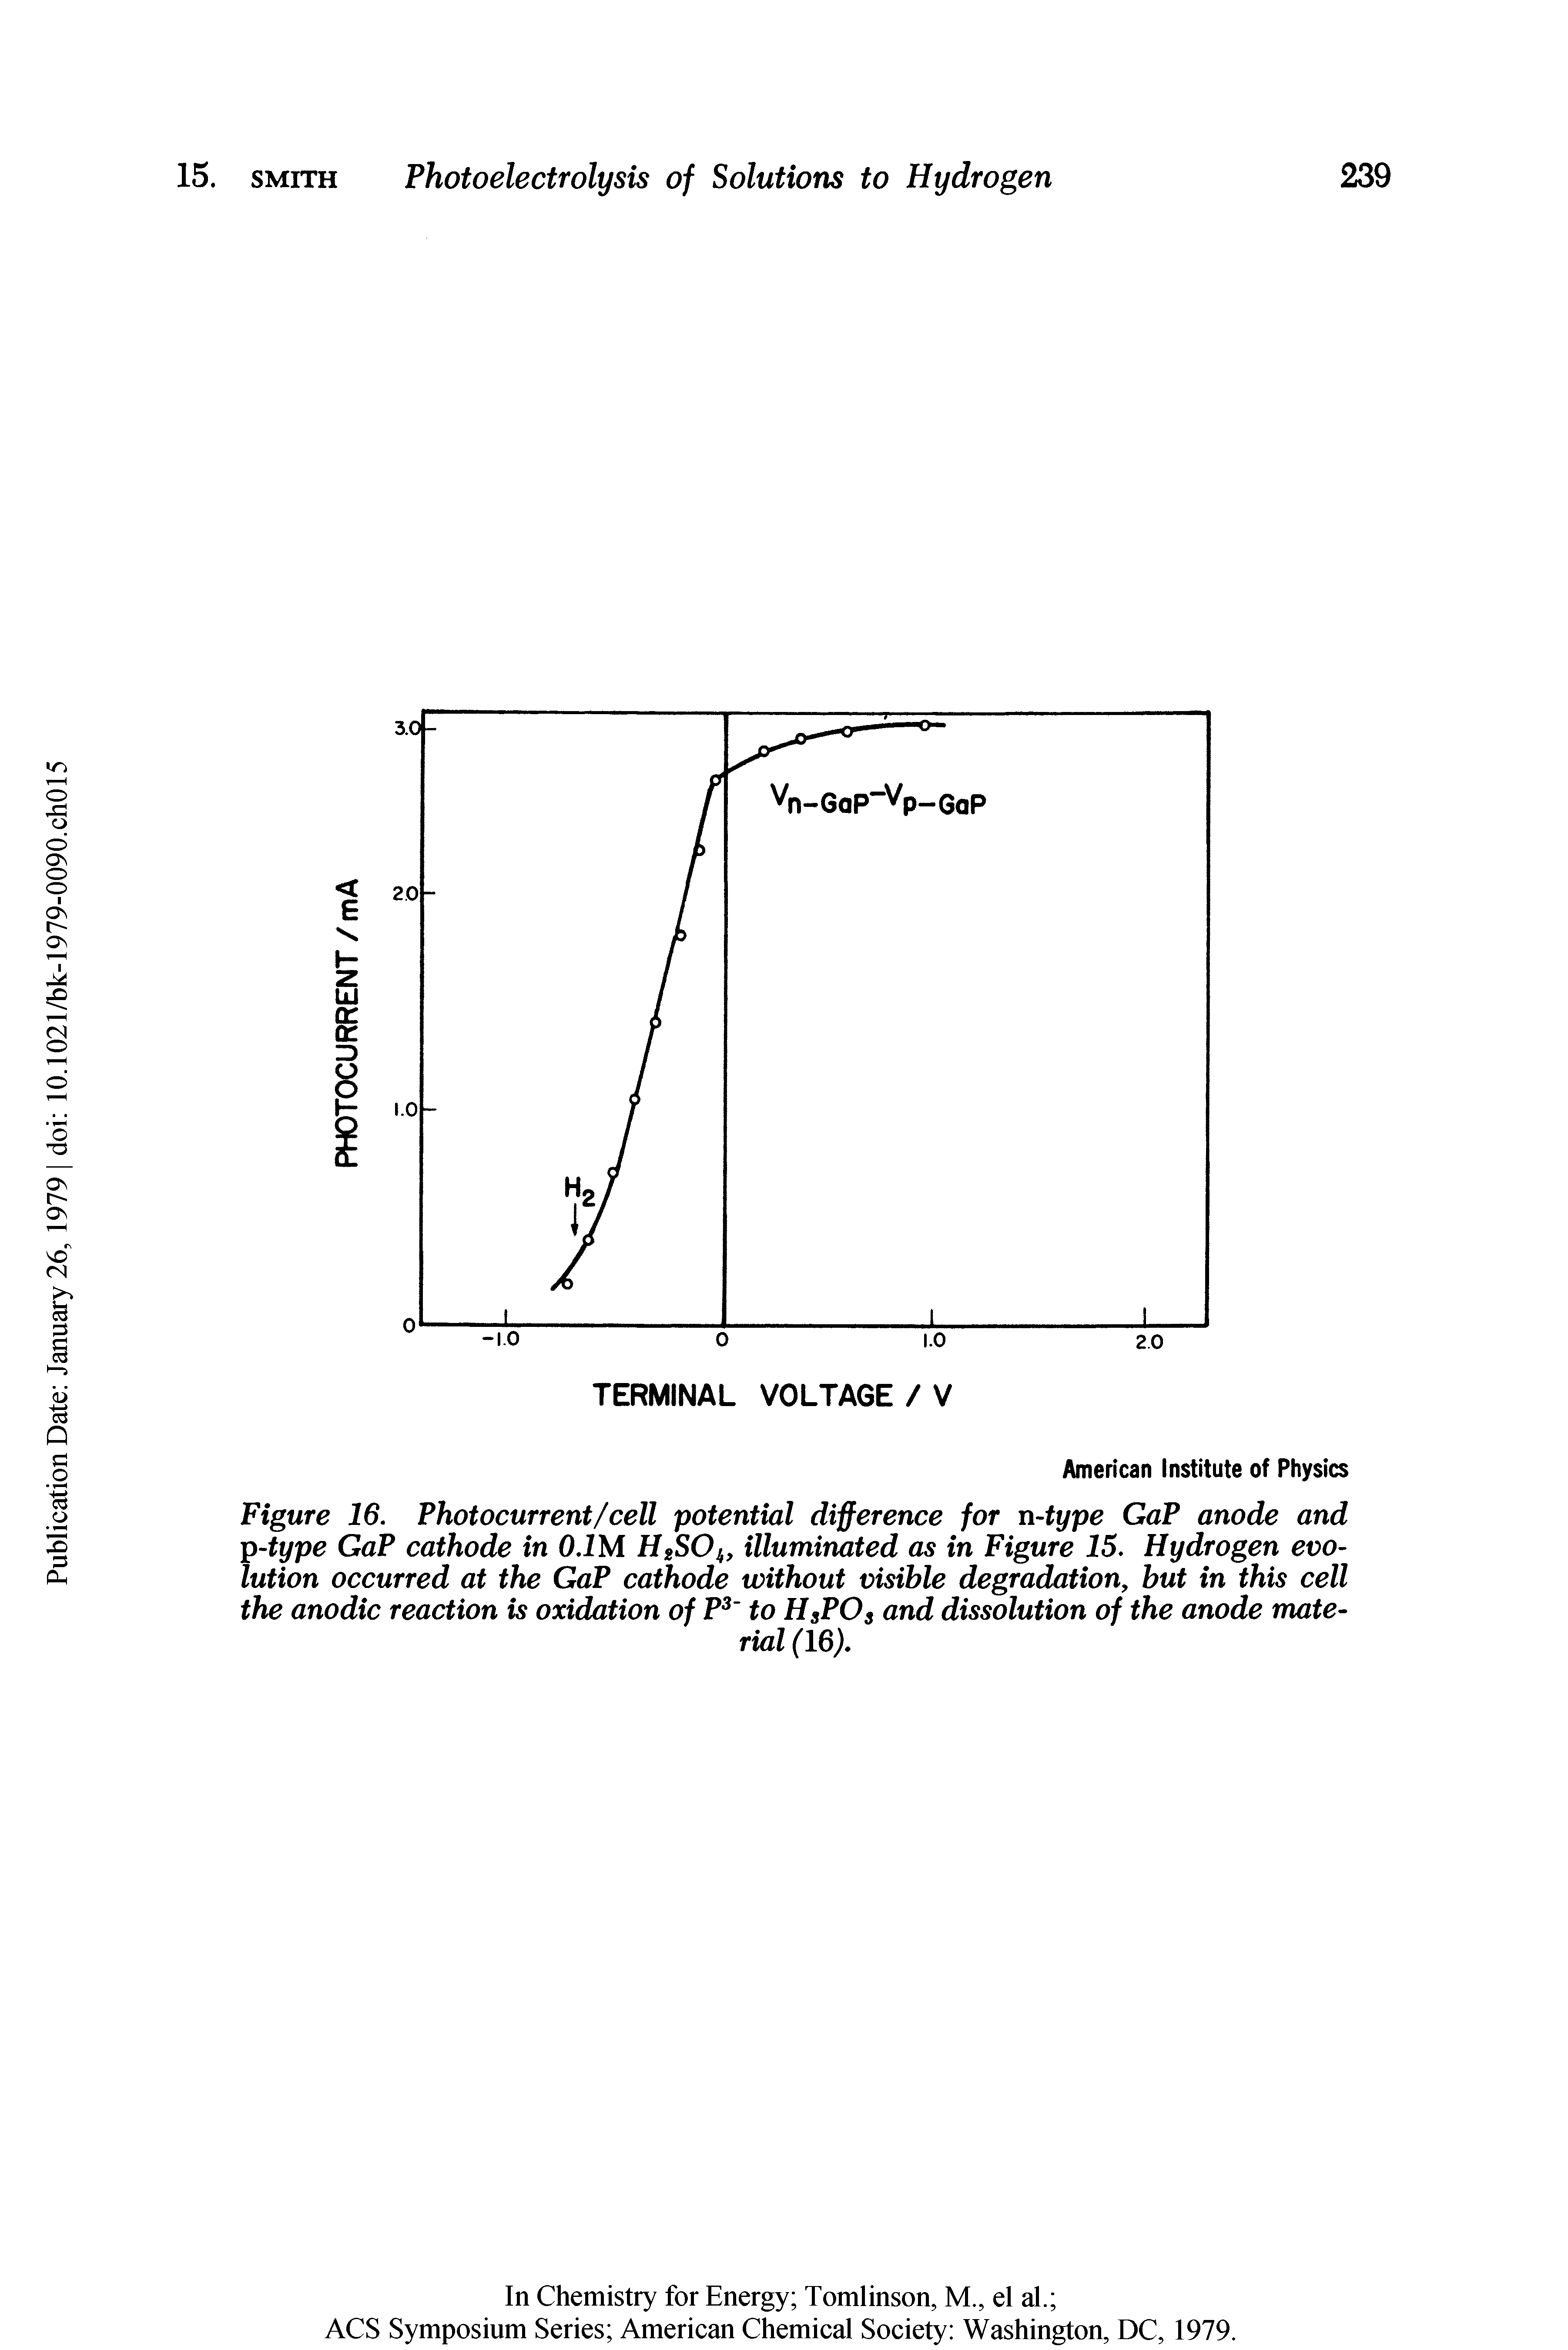 Figure 16. Photocurrent/cell potential difference for n-type GaP anode and p-type GaP cathode in O.IM HfSOi, illuminated as in Figure 15. Hydrogen evolution occurred at the GaP cathode without visible degradation, but in this cell the anodic reaction is oxidation of P to HsPOs and dissolution of the anode material (16).